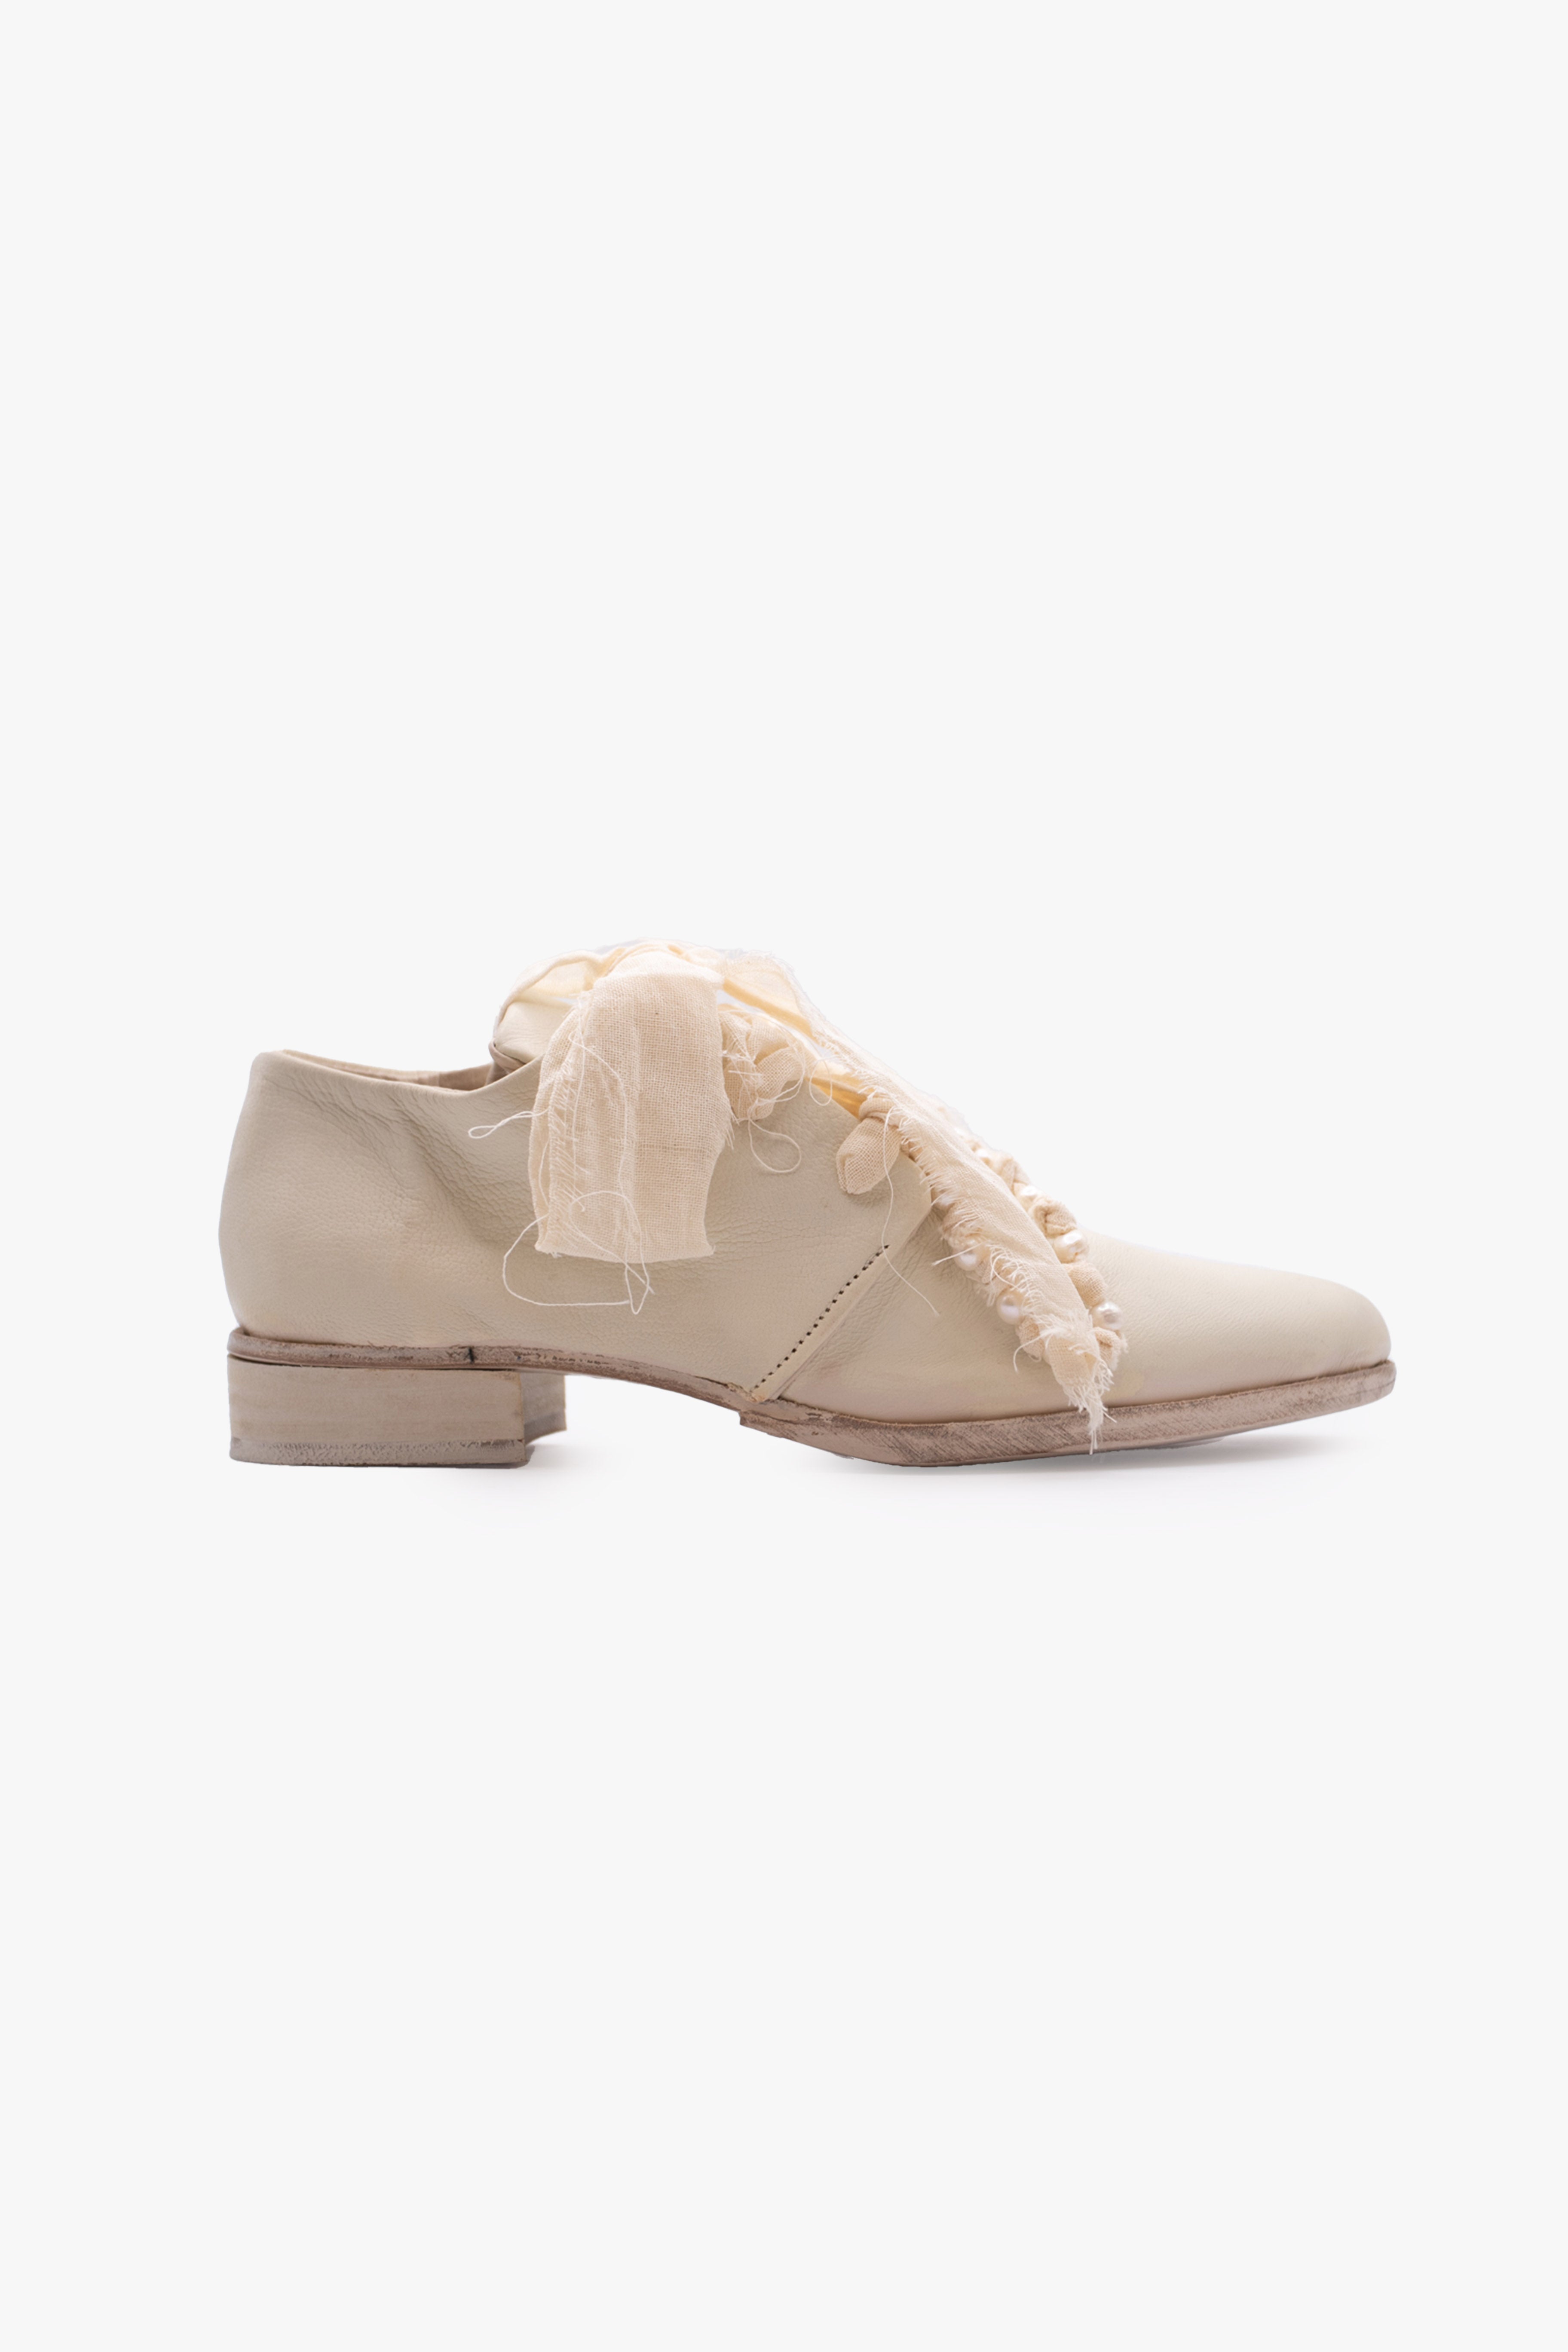 Pearl Lace Up Low Heel